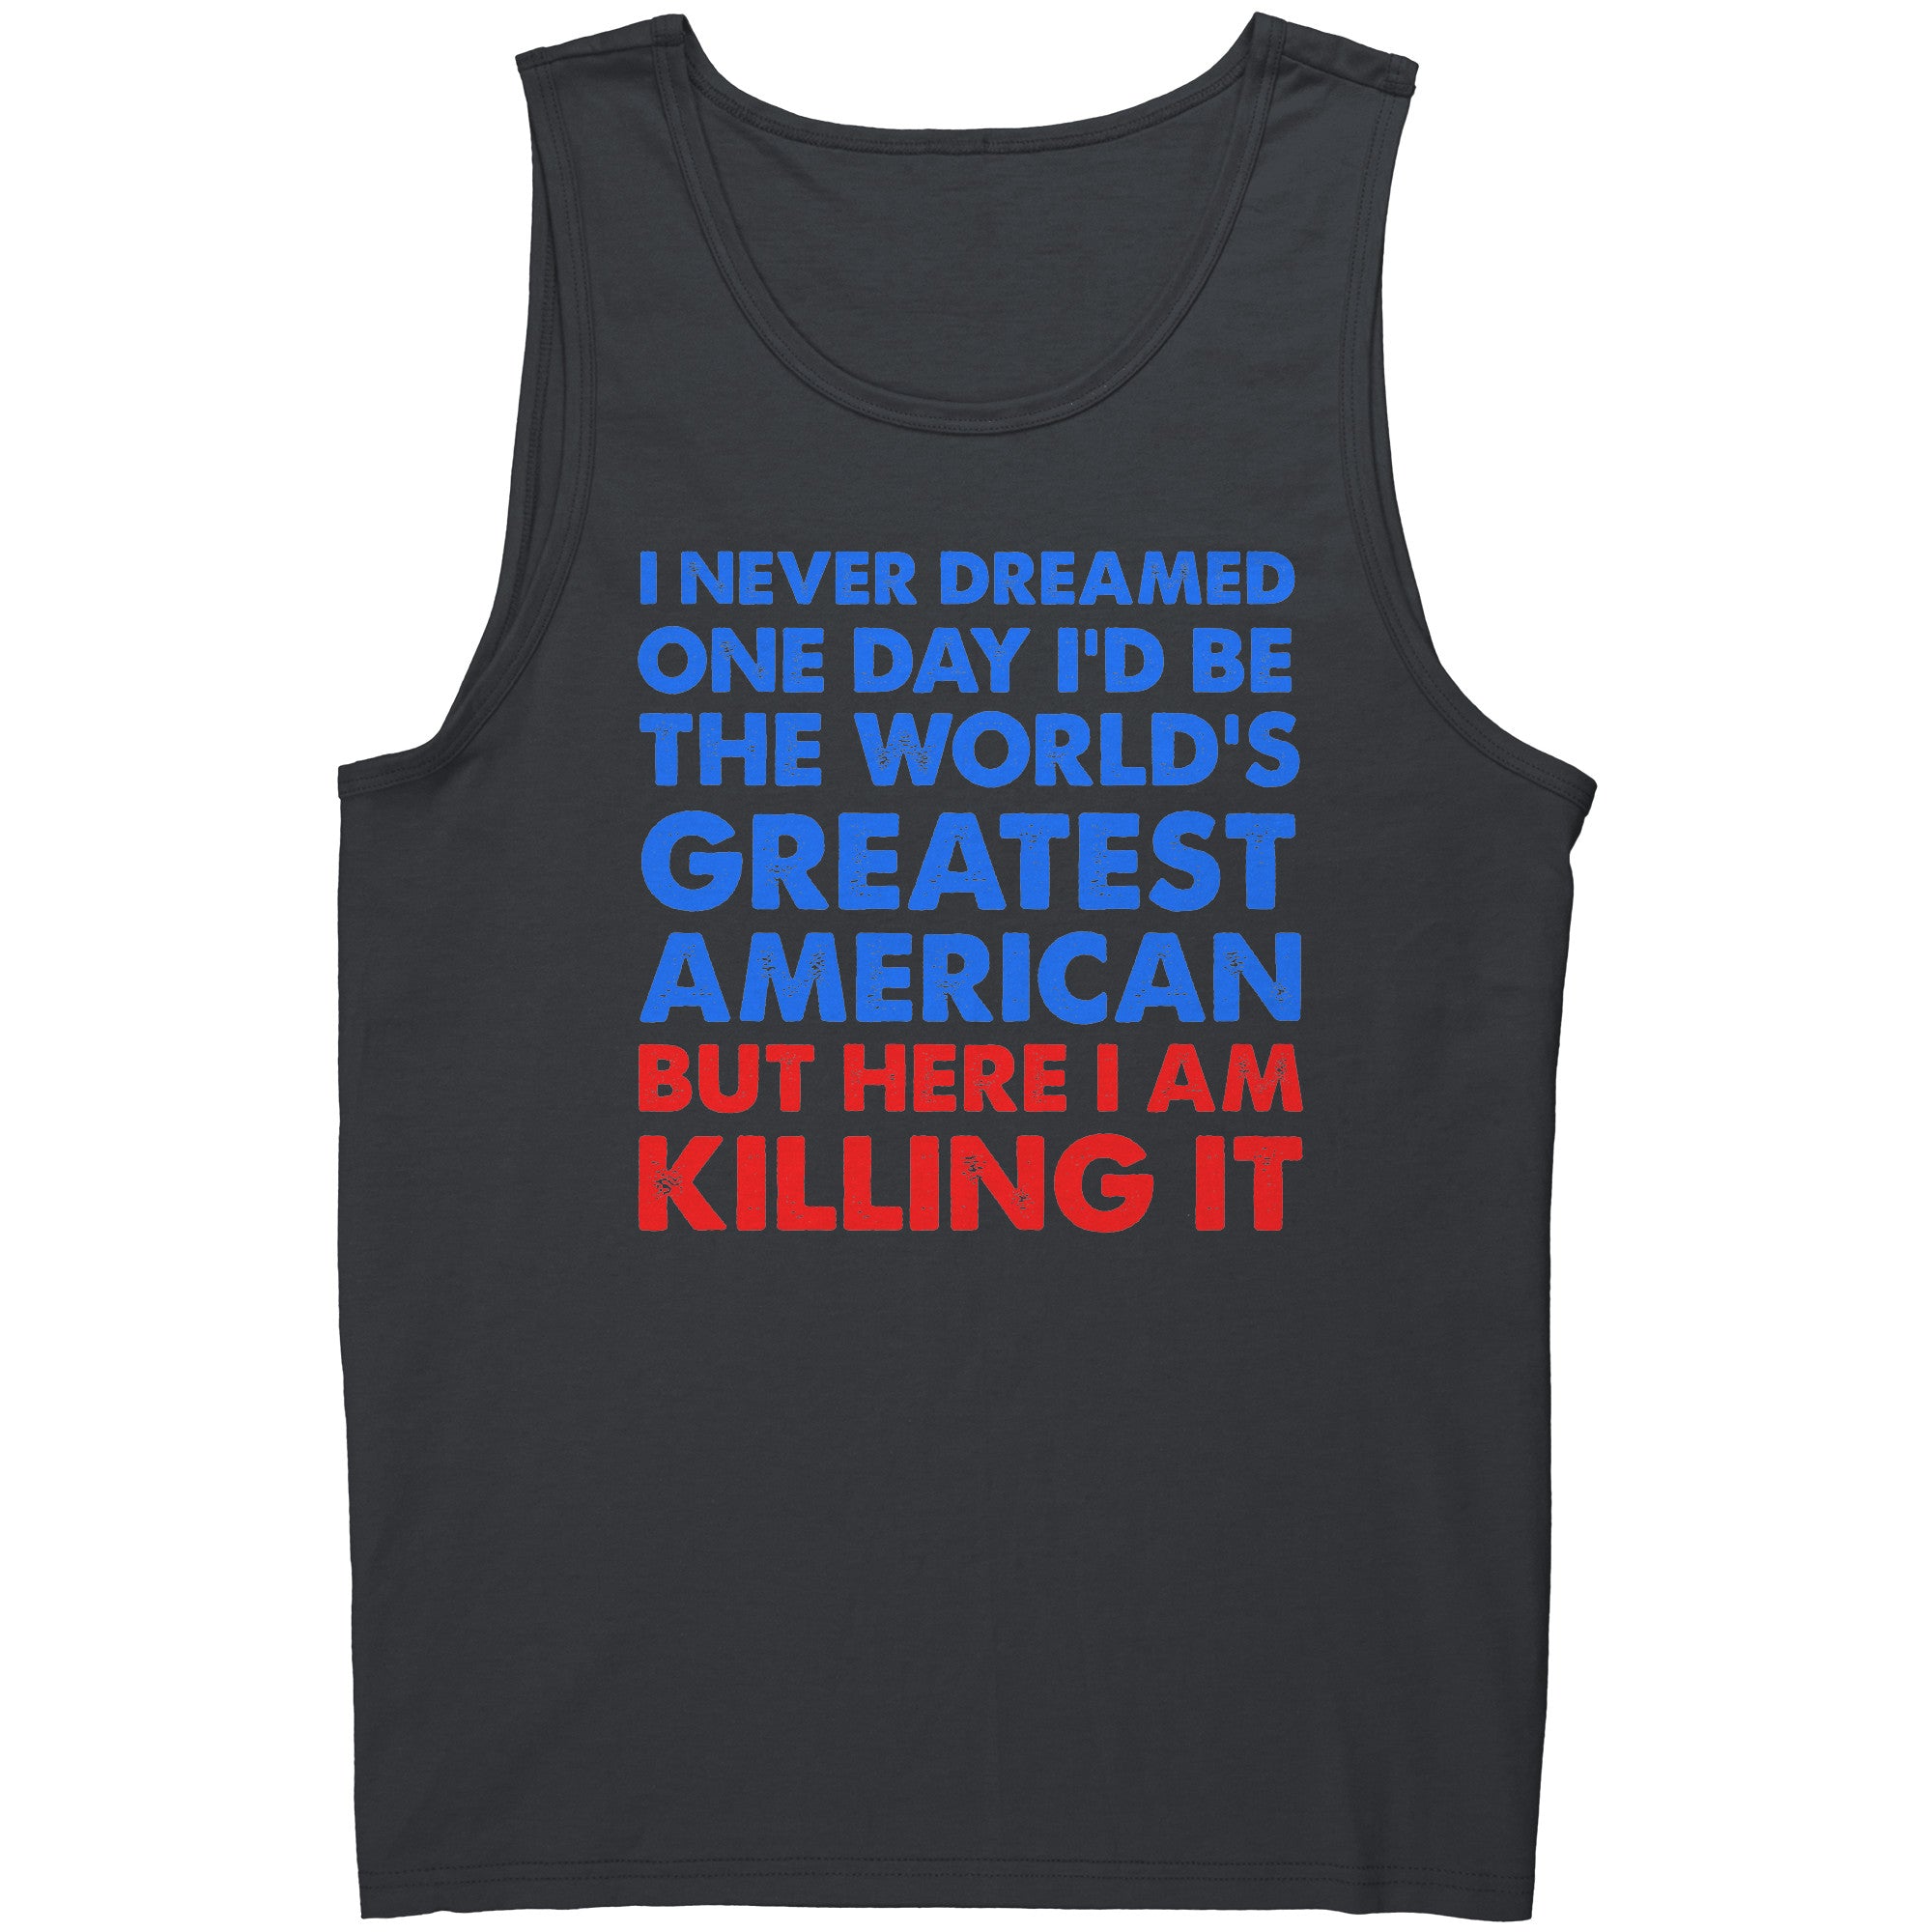 I Never Dreamed One Day I'd Be The World's Greatest American But Here I Am Killing It -Apparel | Drunk America 